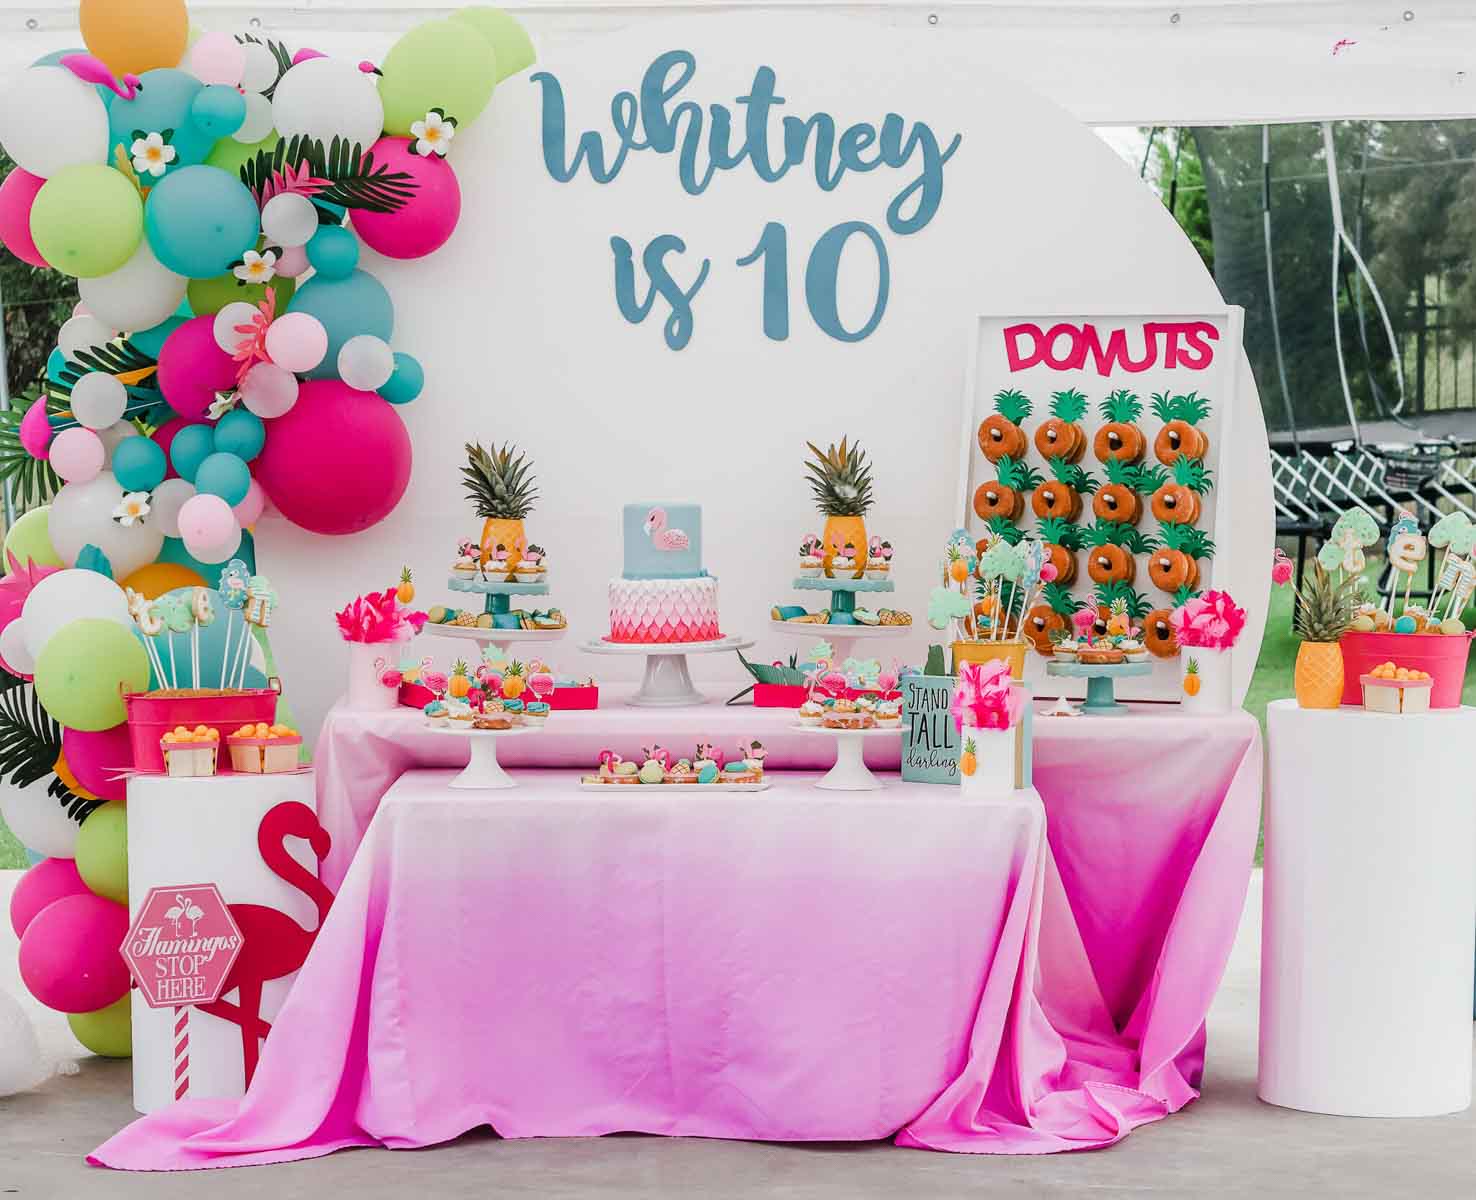 pink party table with a balloon garland